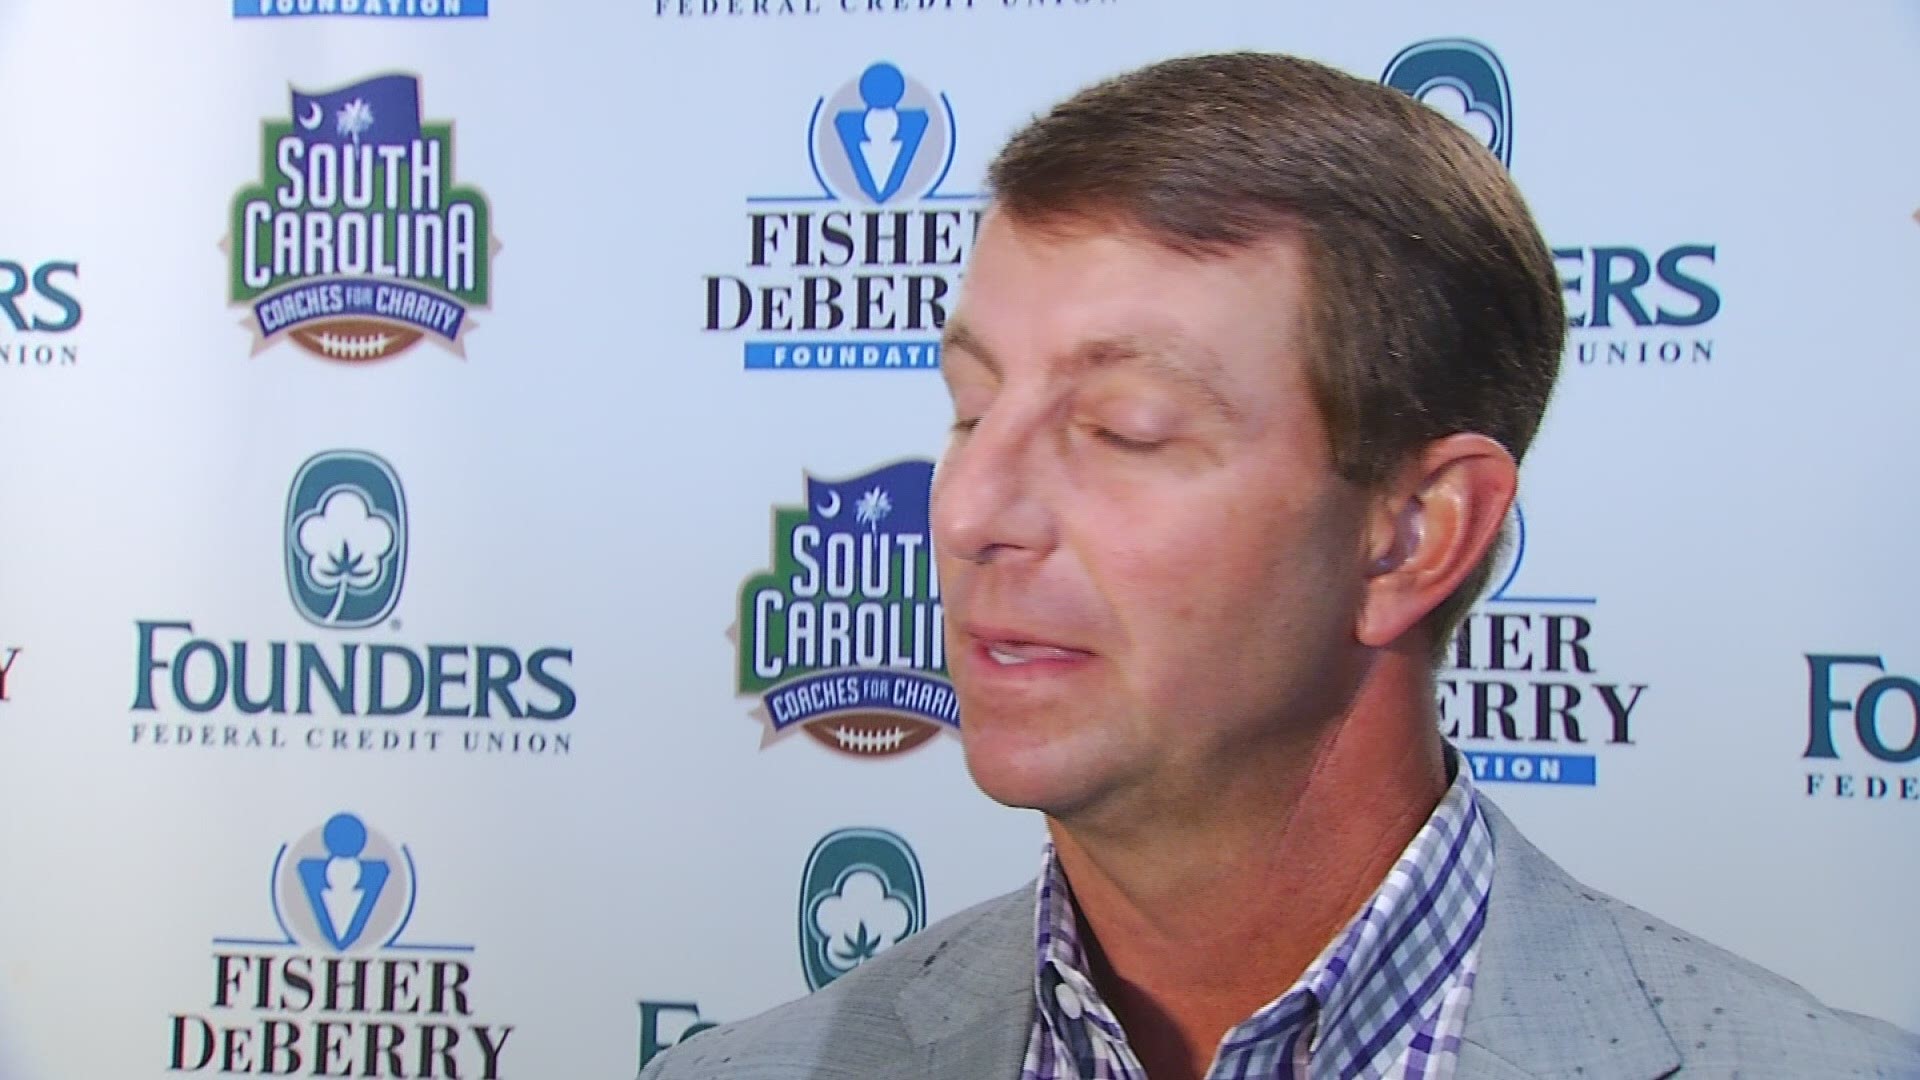 Clemson head football coach Dabo Swinney was asked about the video of defensive lineman Christian Wilkins dancing shirtless at the Ladies Football Clinic.